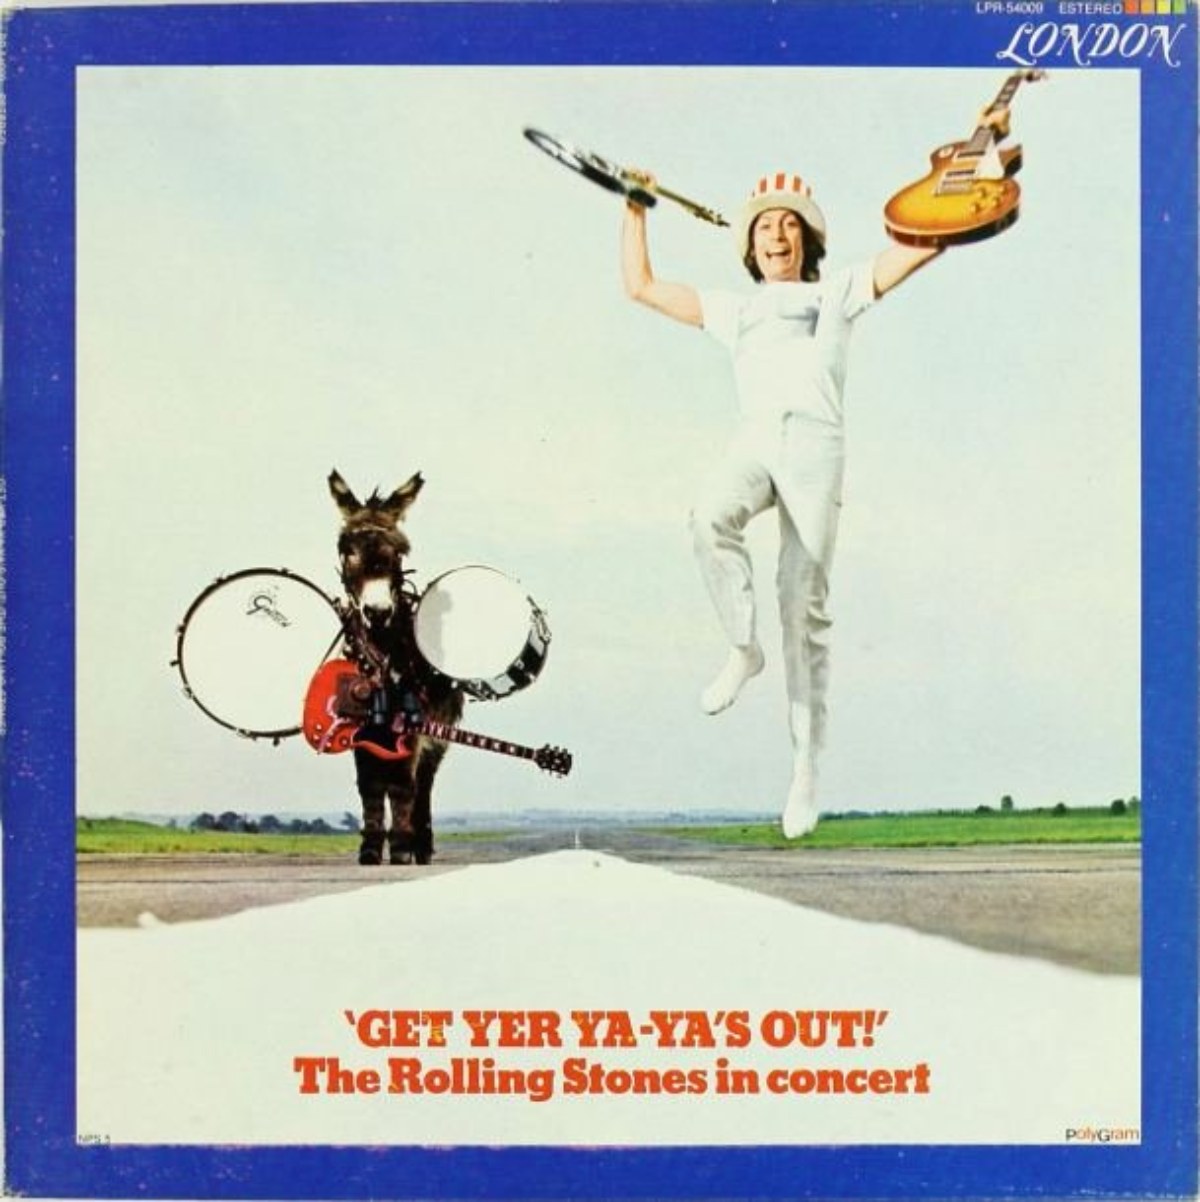 The Rolling Stones - Get Yer Ya-Ya's Out ! (1970)